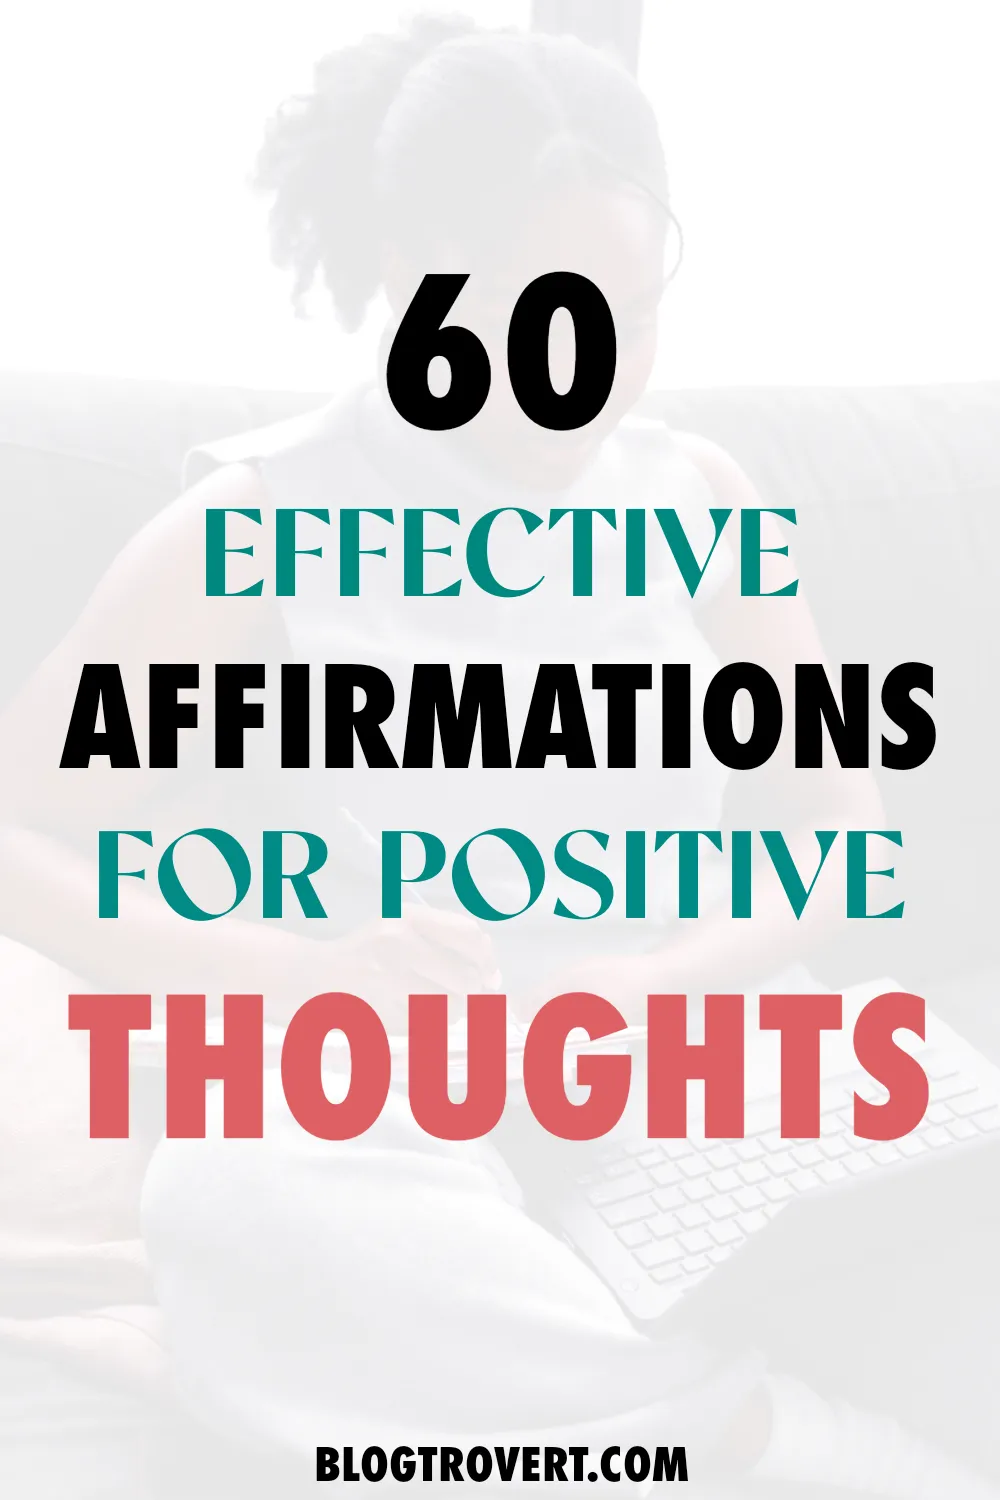 60 Effective Affirmations for Positive Thinking & Emotional Wellbeing 2